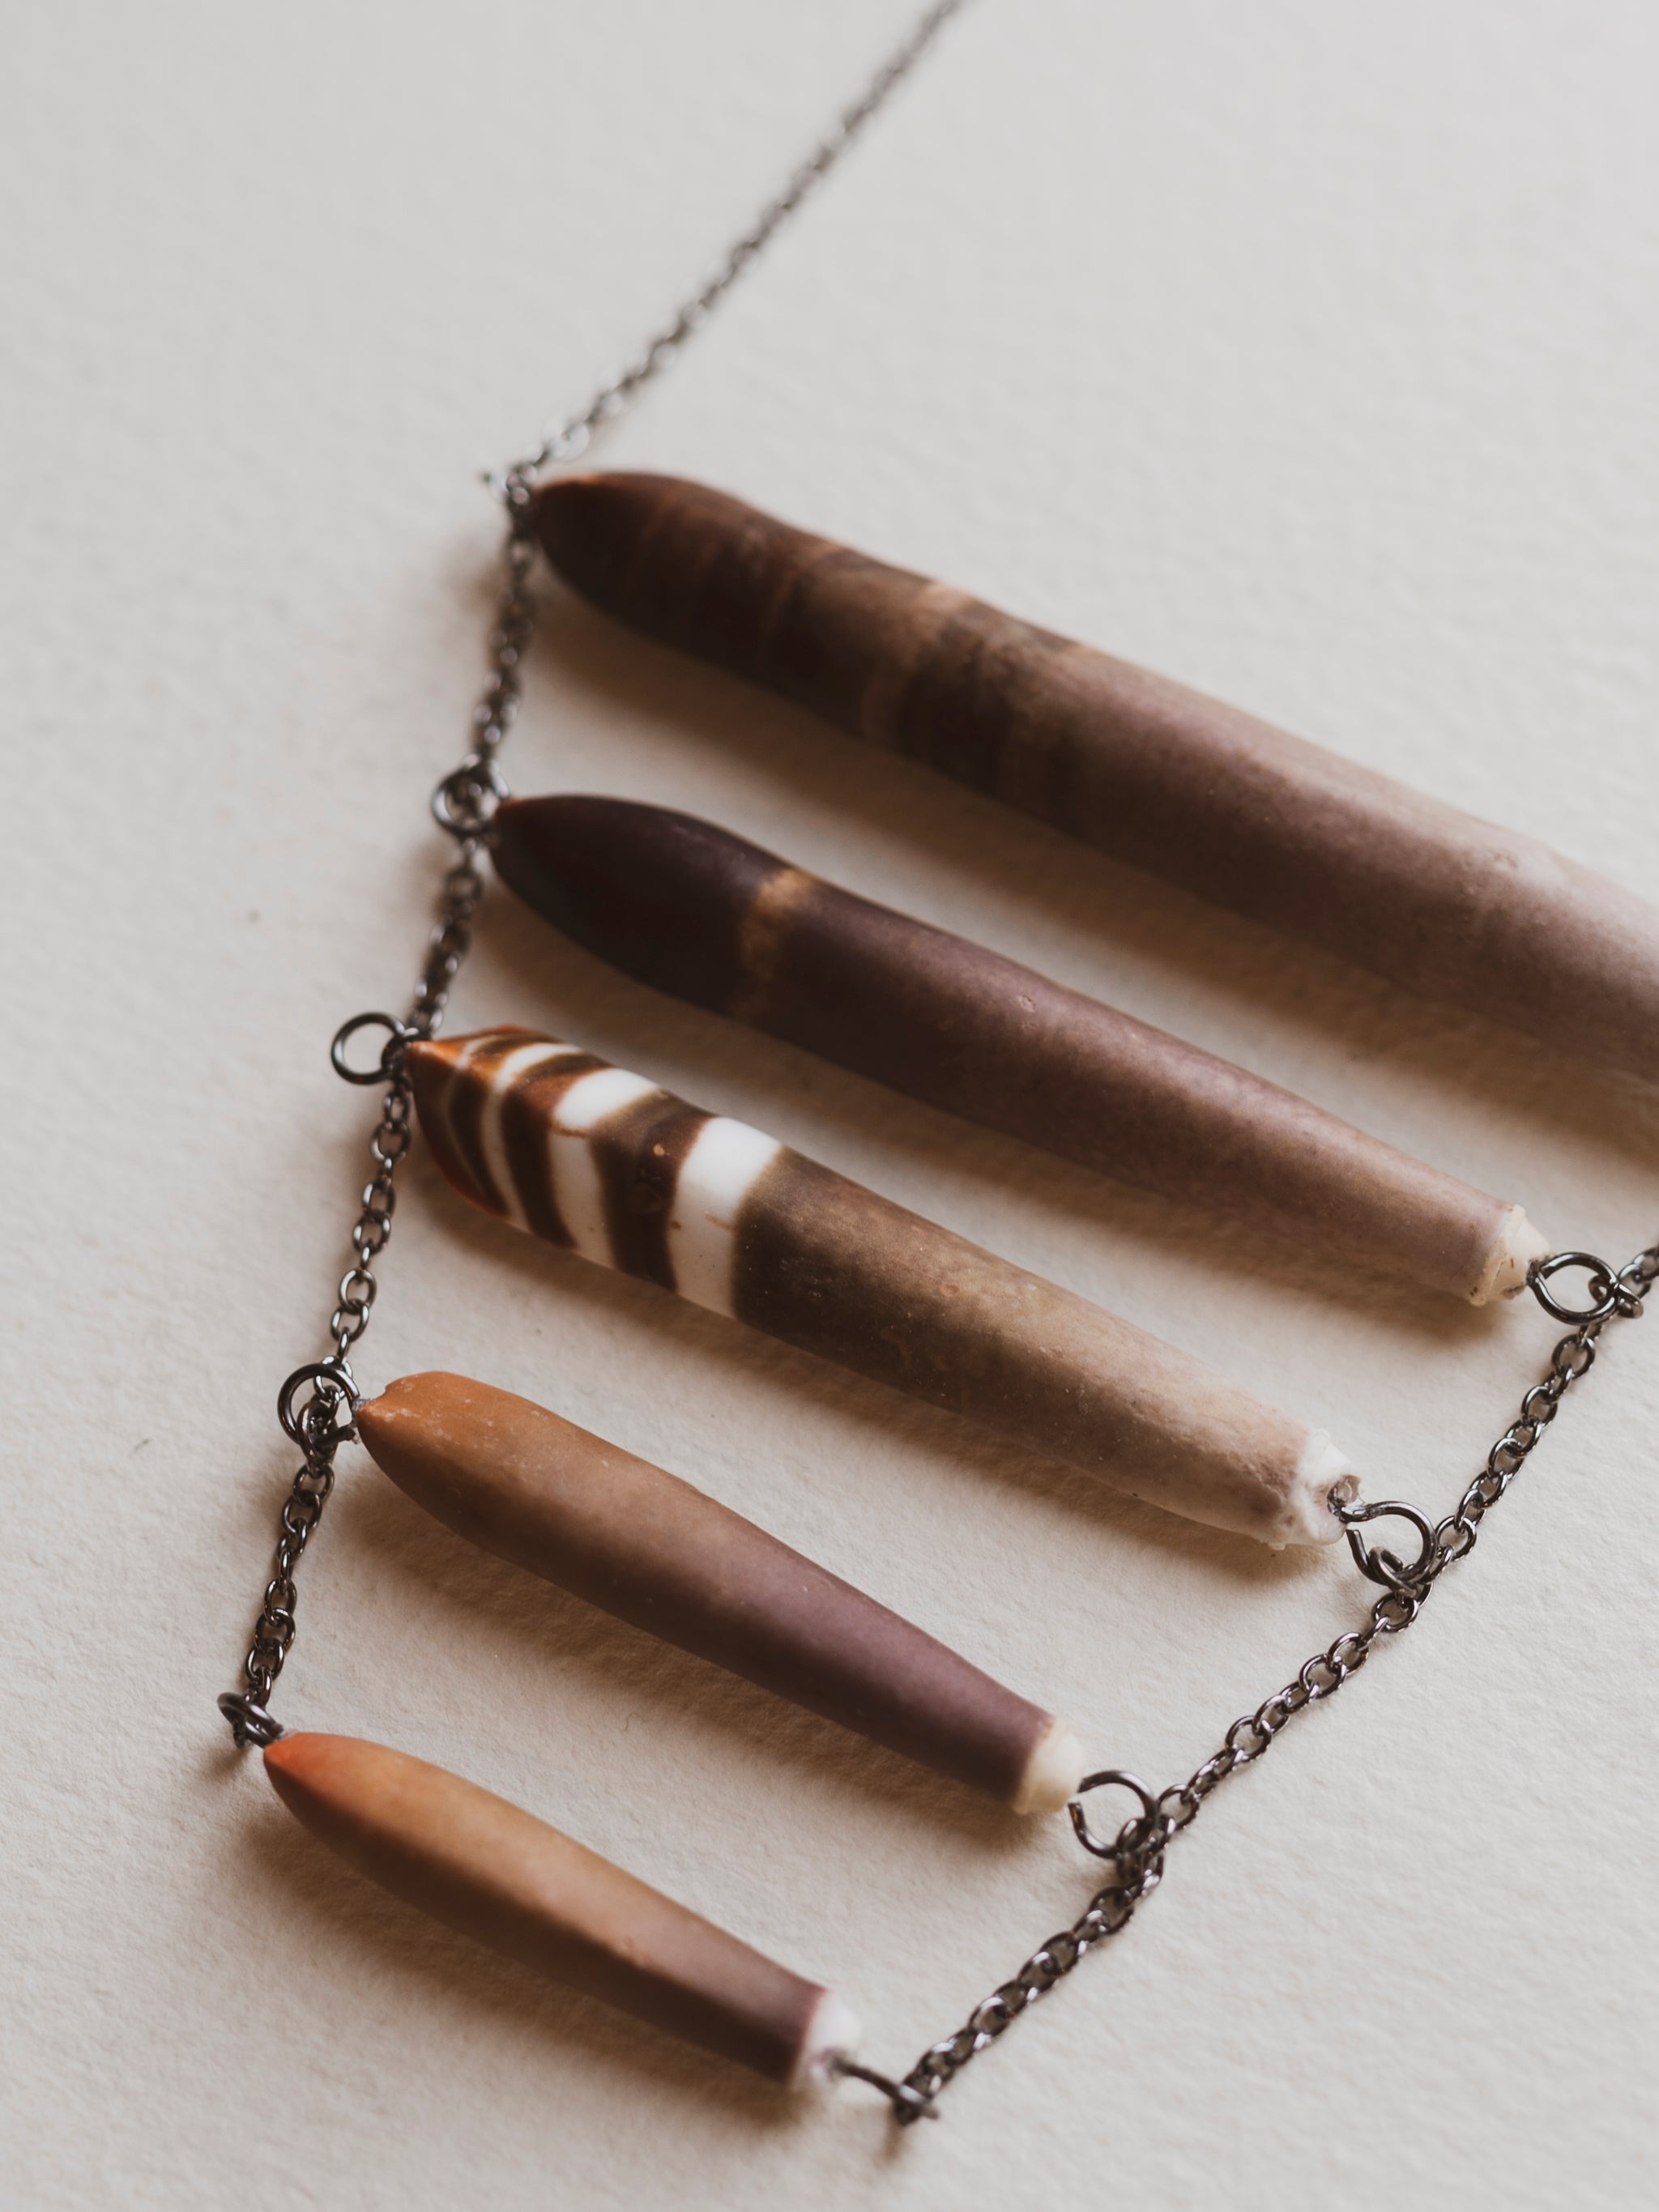 Slate Pencil Sea Urchin Quill Stepped Necklace, CA851